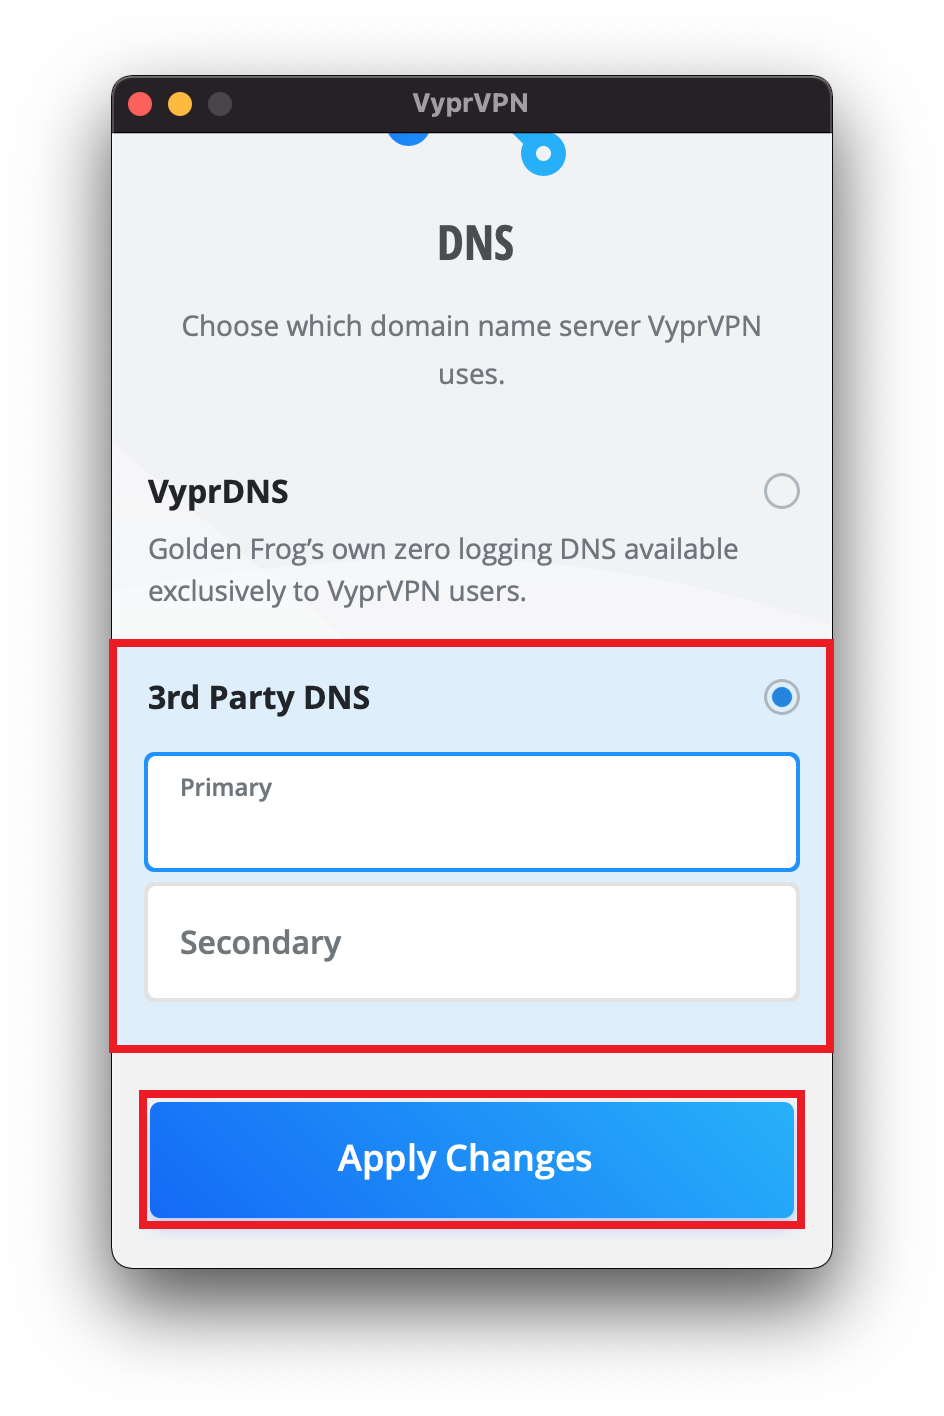 Vypr_App_-_DNS_Menu_-_3rd_Party_and_Apply_Changes_Selected.png